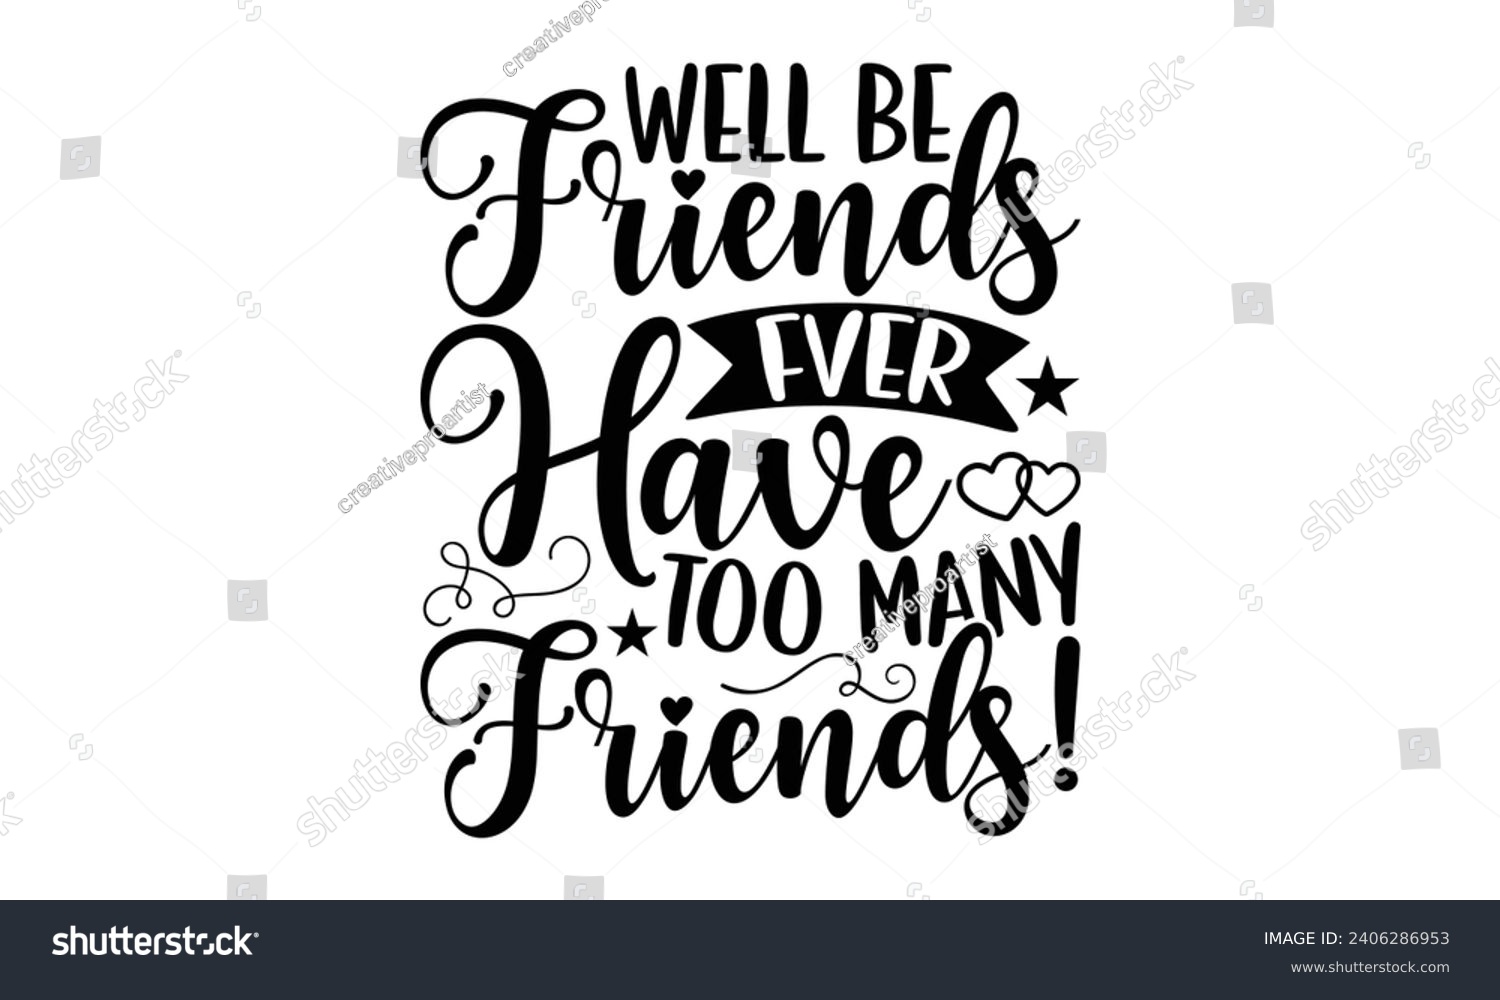 SVG of Well Be Friends Fver Have Too Many Friends!- Best friends t- shirt design, Hand drawn vintage illustration with hand-lettering and decoration elements, greeting card template with typography text svg